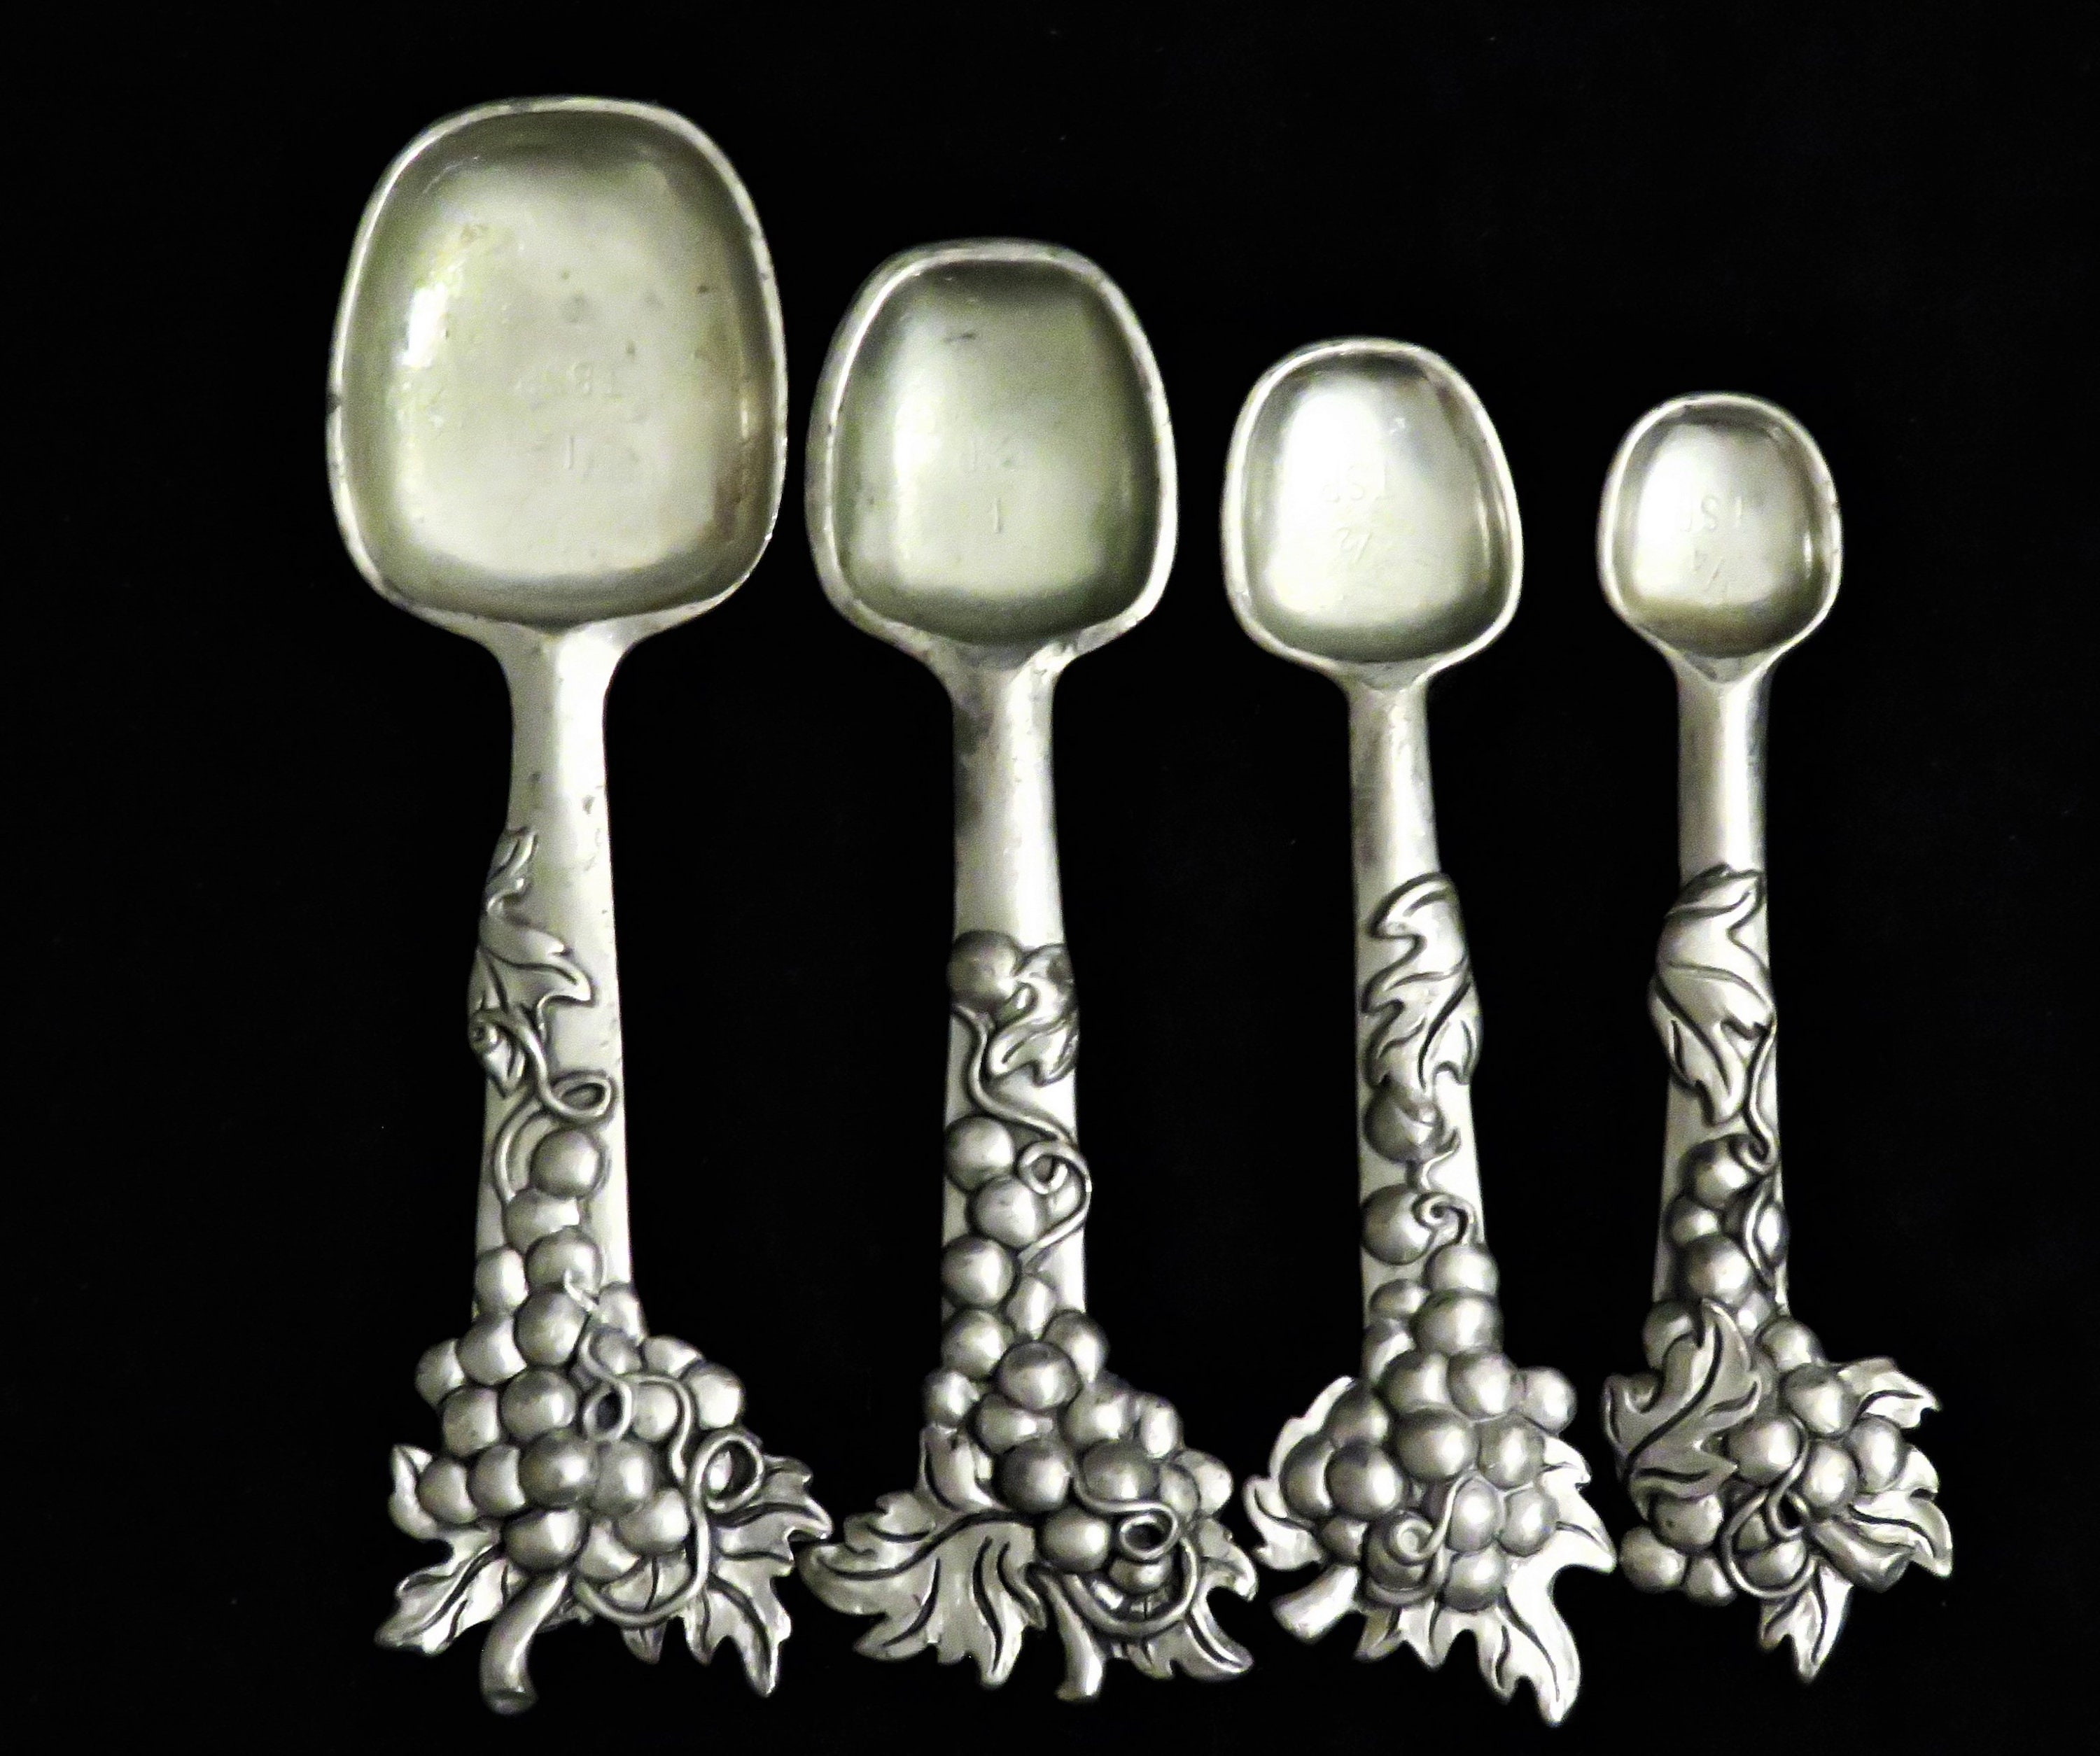 Pewter Measuring Spoons With Grape Clusters on the Handles 